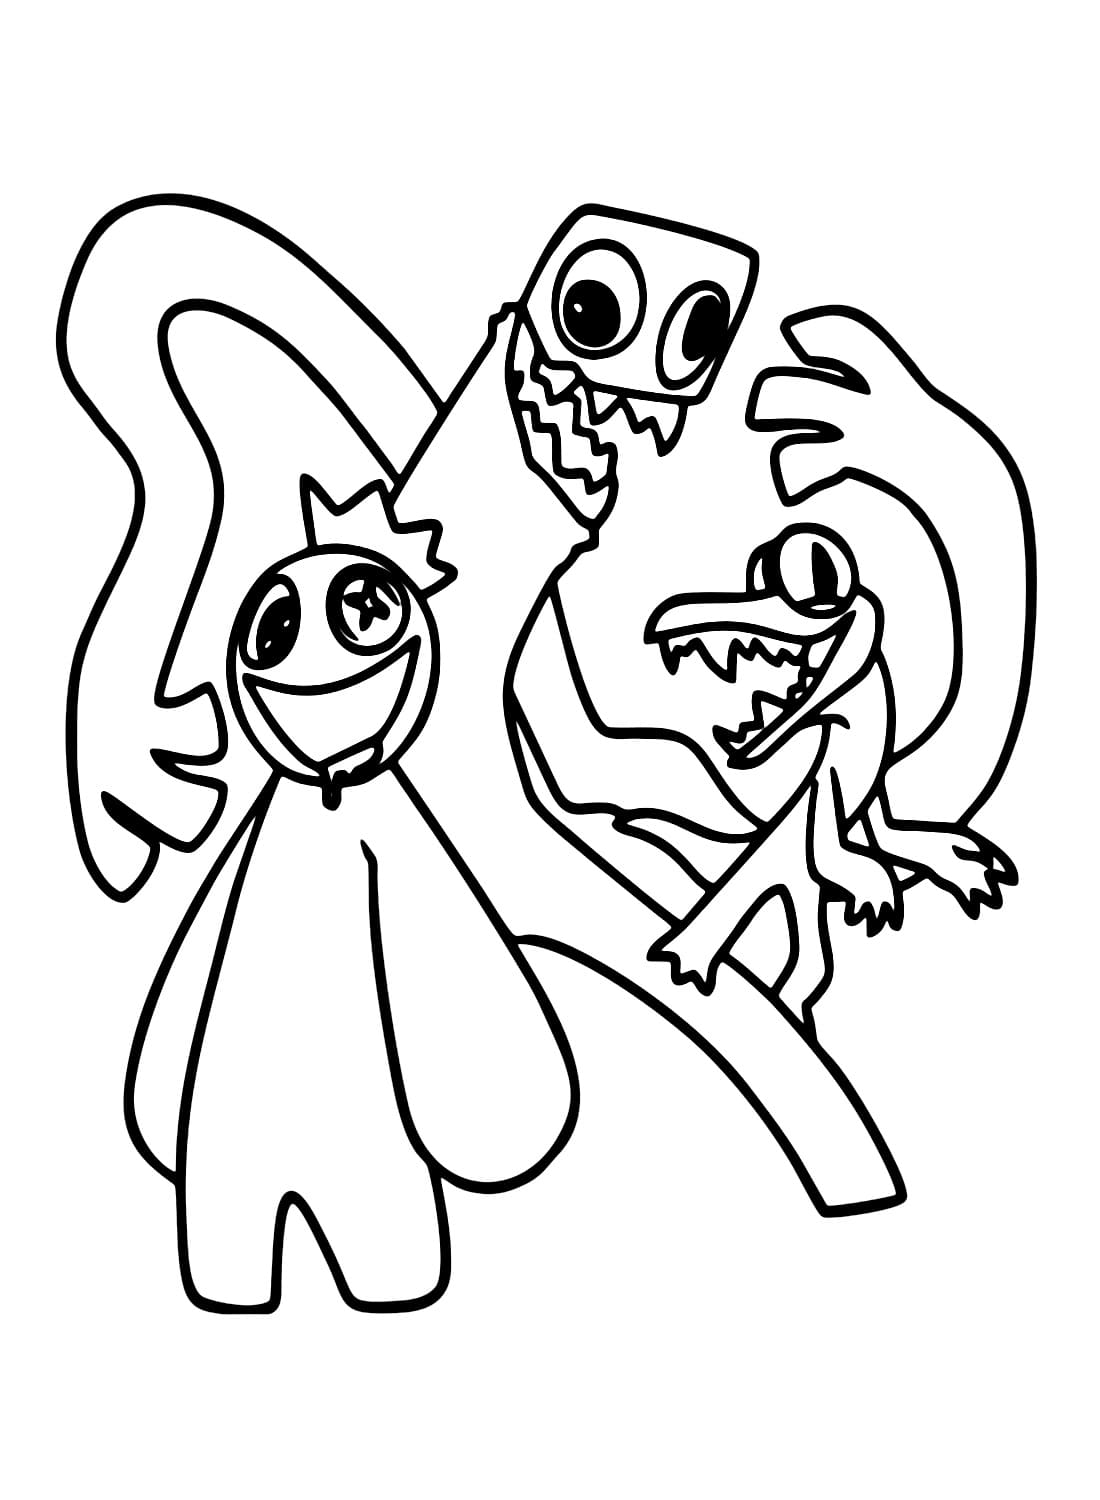 Rainbow Friends coloring pages - ColoringLib